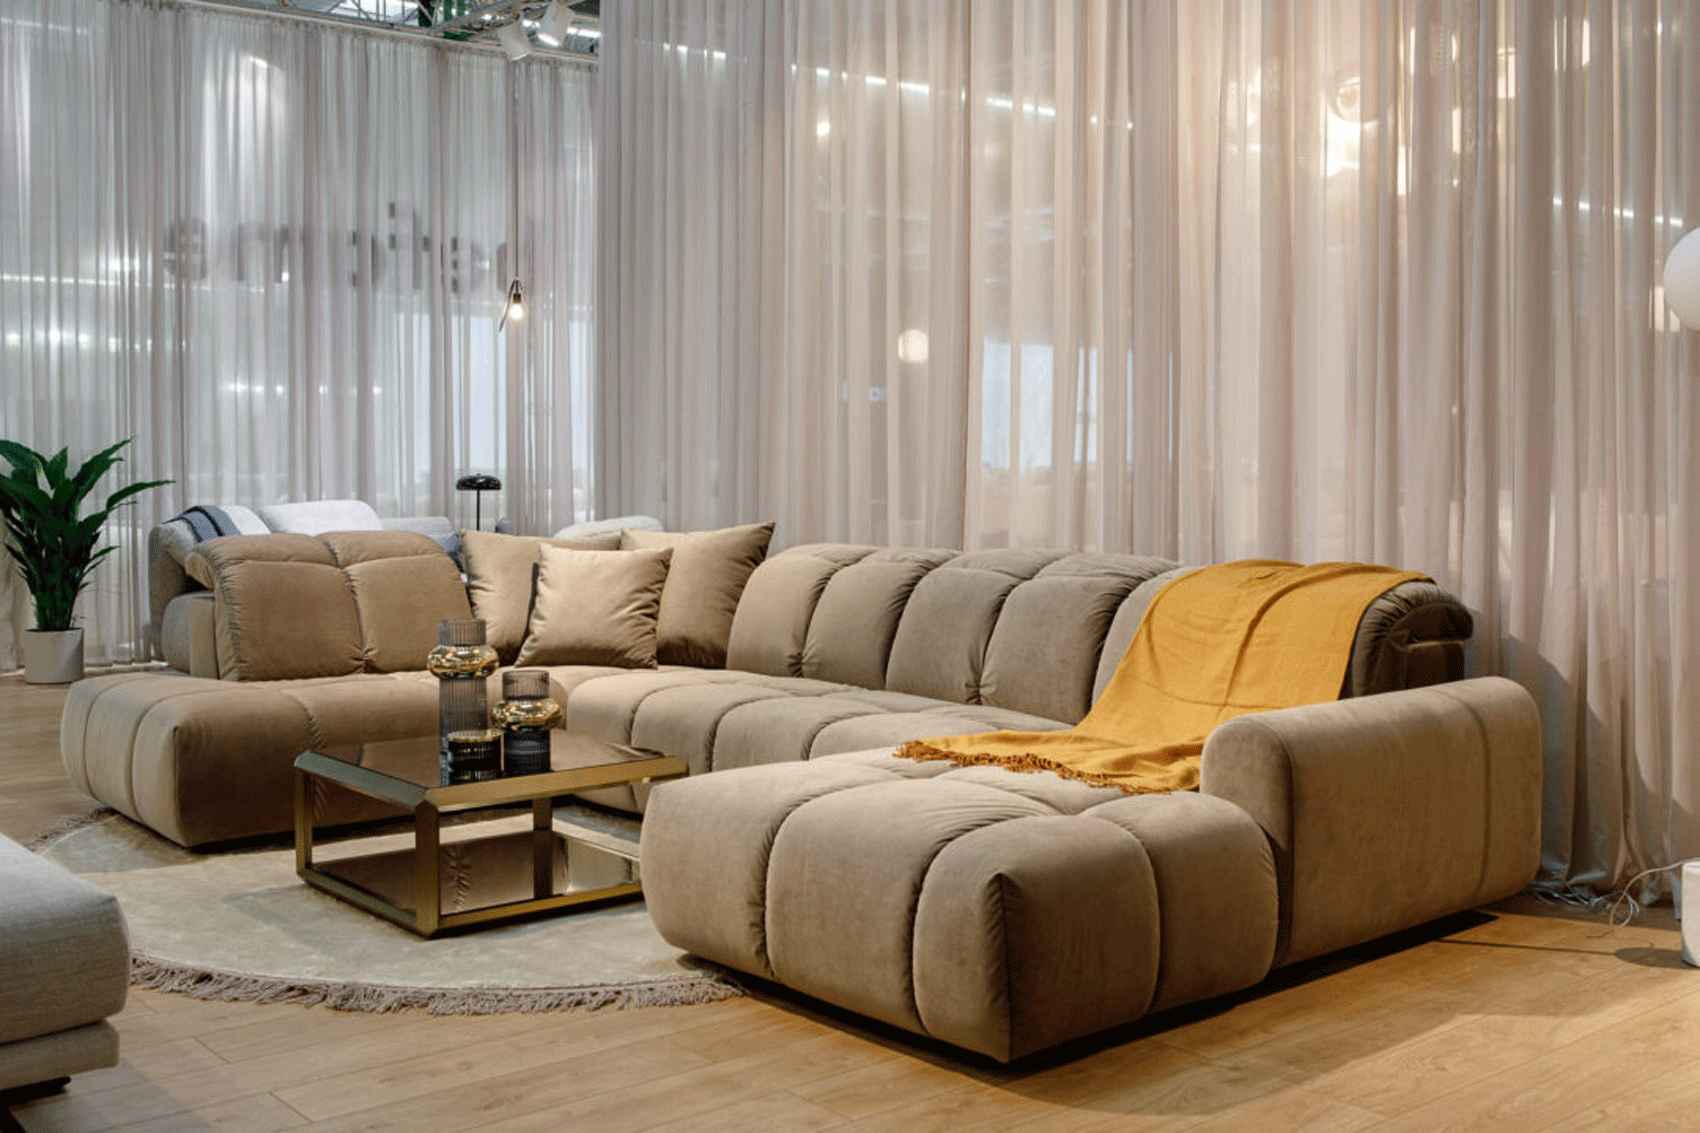 Living Room Furniture Reclining and Sliding Seats Sets Bullet U-shaped Sectional